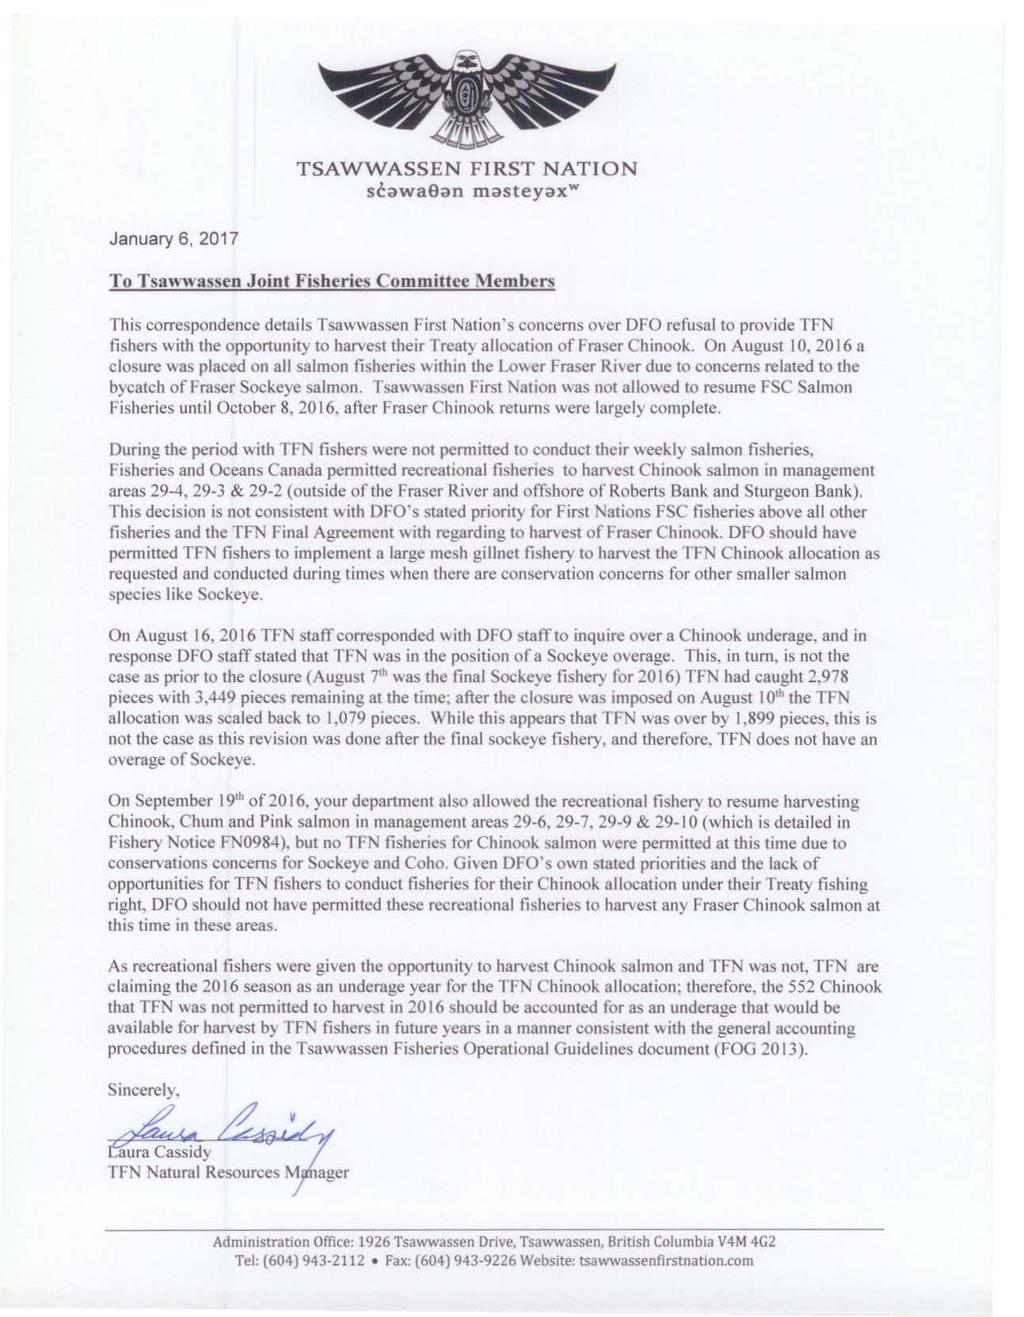 TSAWWASSEN FIRST NATION scawaaan masteyaxw January 6, 2017 To TsaW\\ assen J oint Fisheries Committee Members This correspondence details Tsawwassen First Nation's concerns over DFO refusal to